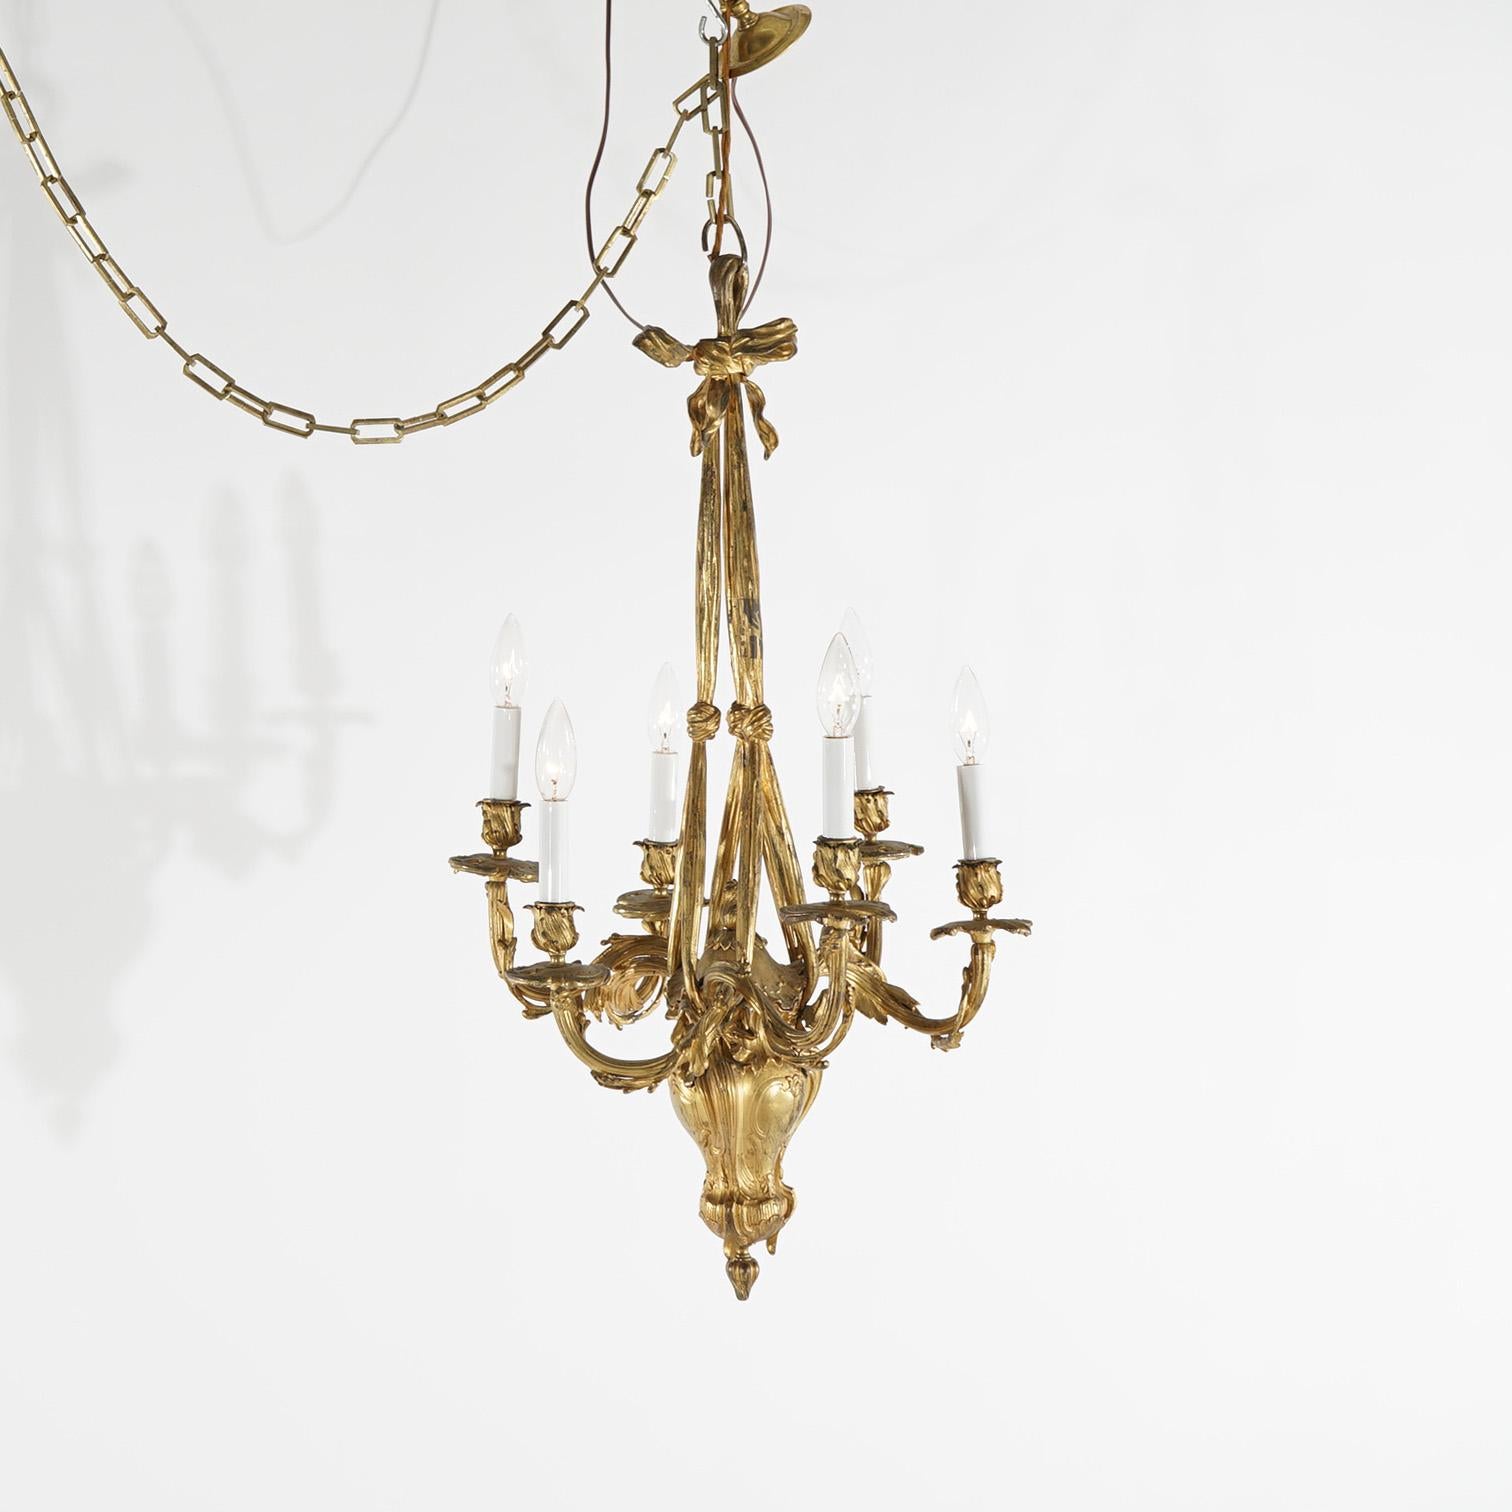 A French Louis XIV style chandelier offers gilt cast bronze frame with stylized urn font having six foliate form scroll arms terminating in candle lights, suspended by drape form drops, c1920

Measures- 32.5''H x 17''W x 17''D; 60'' drop